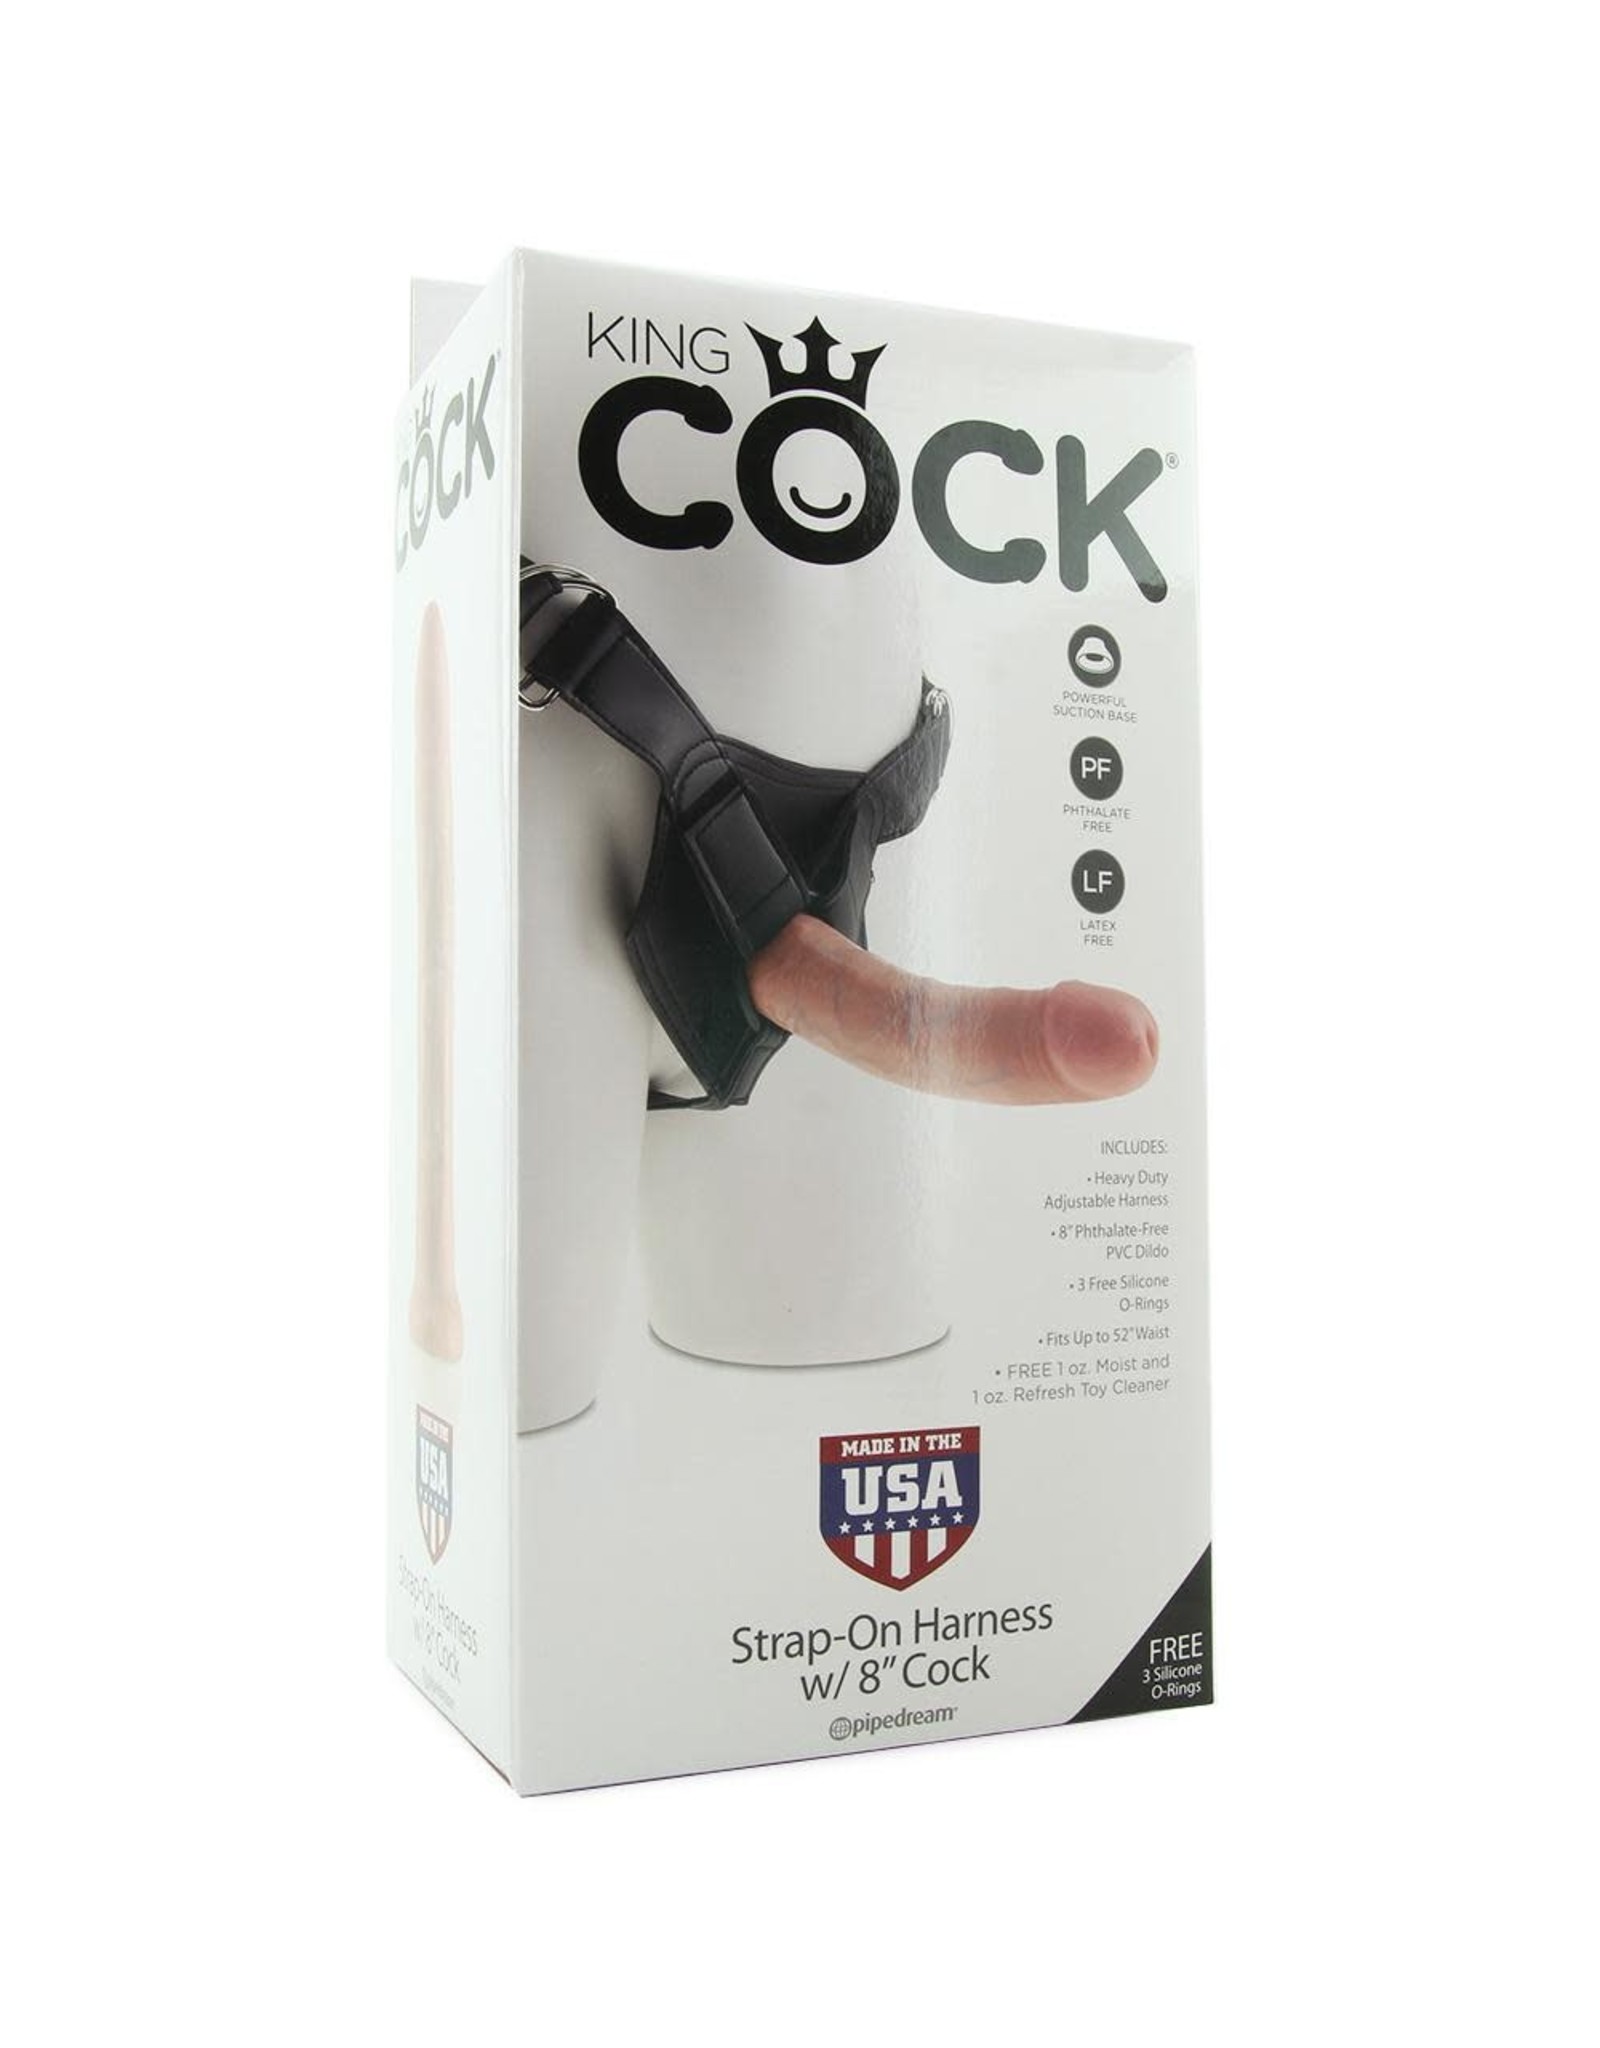 KING COCK KING COCK - STRAP-ON HARNESS W/8" COCK - F